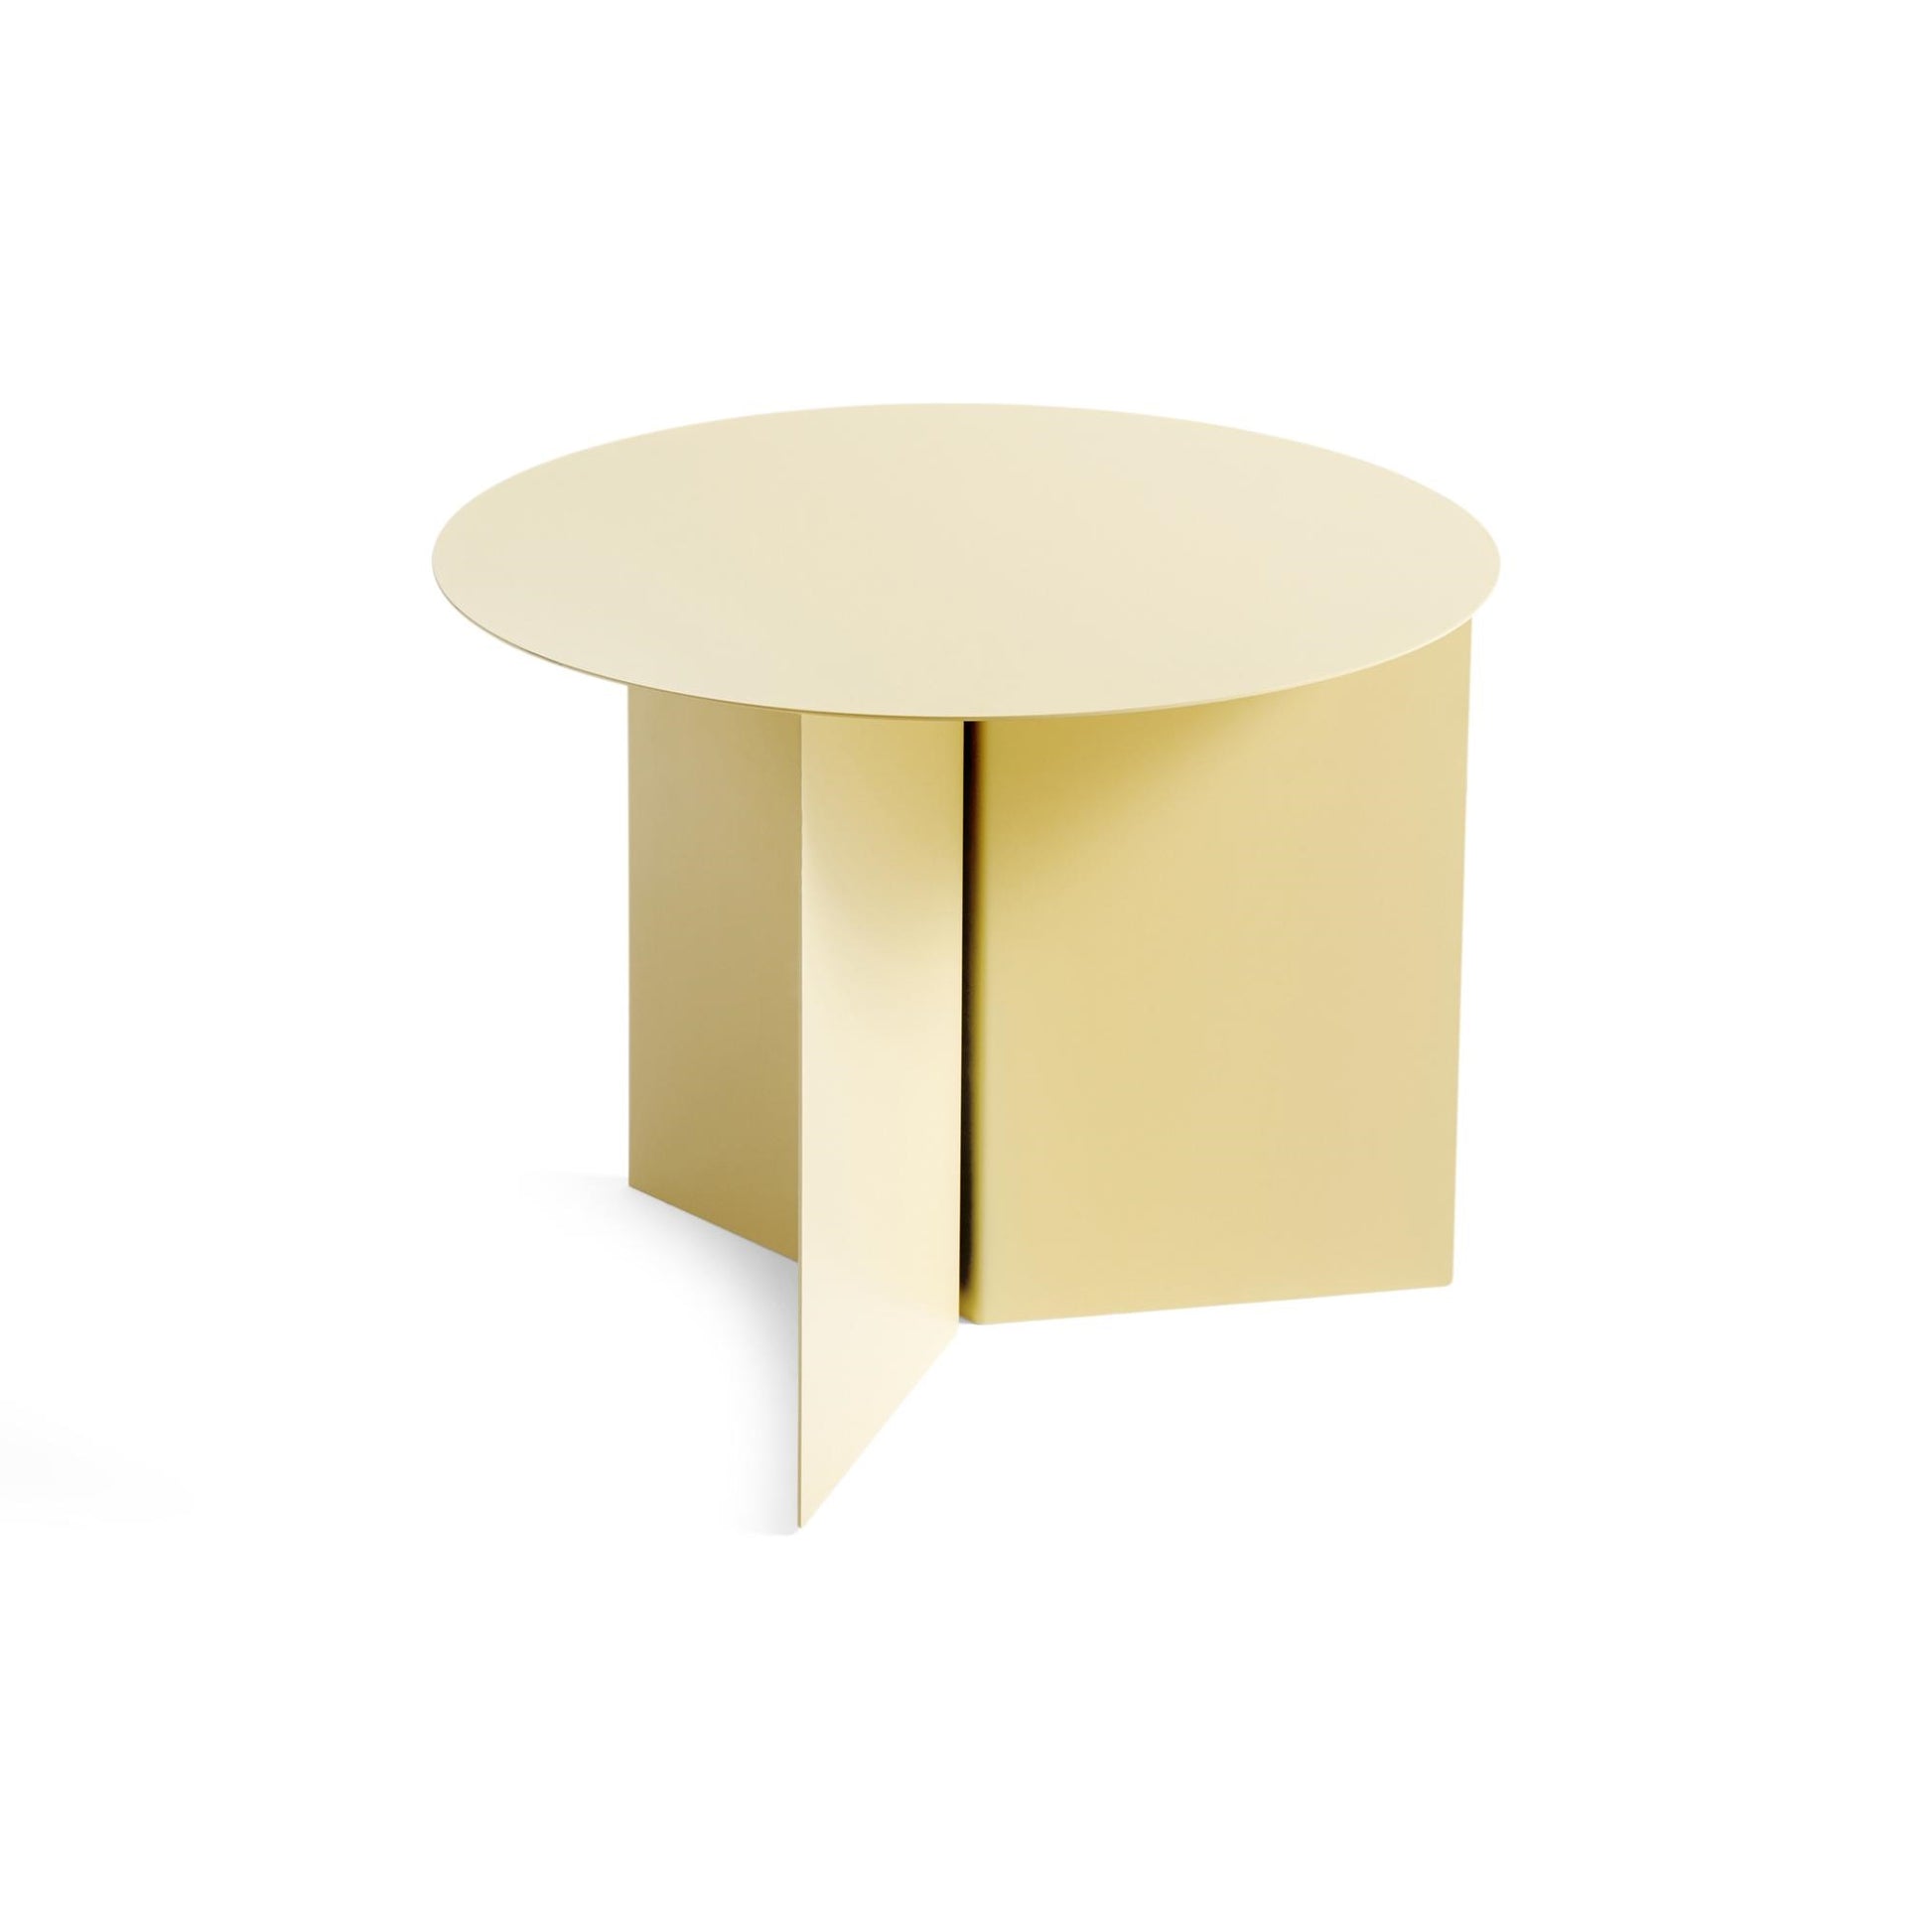 Slit Coffee Table Round Ø45 by HAY #Light Yellow